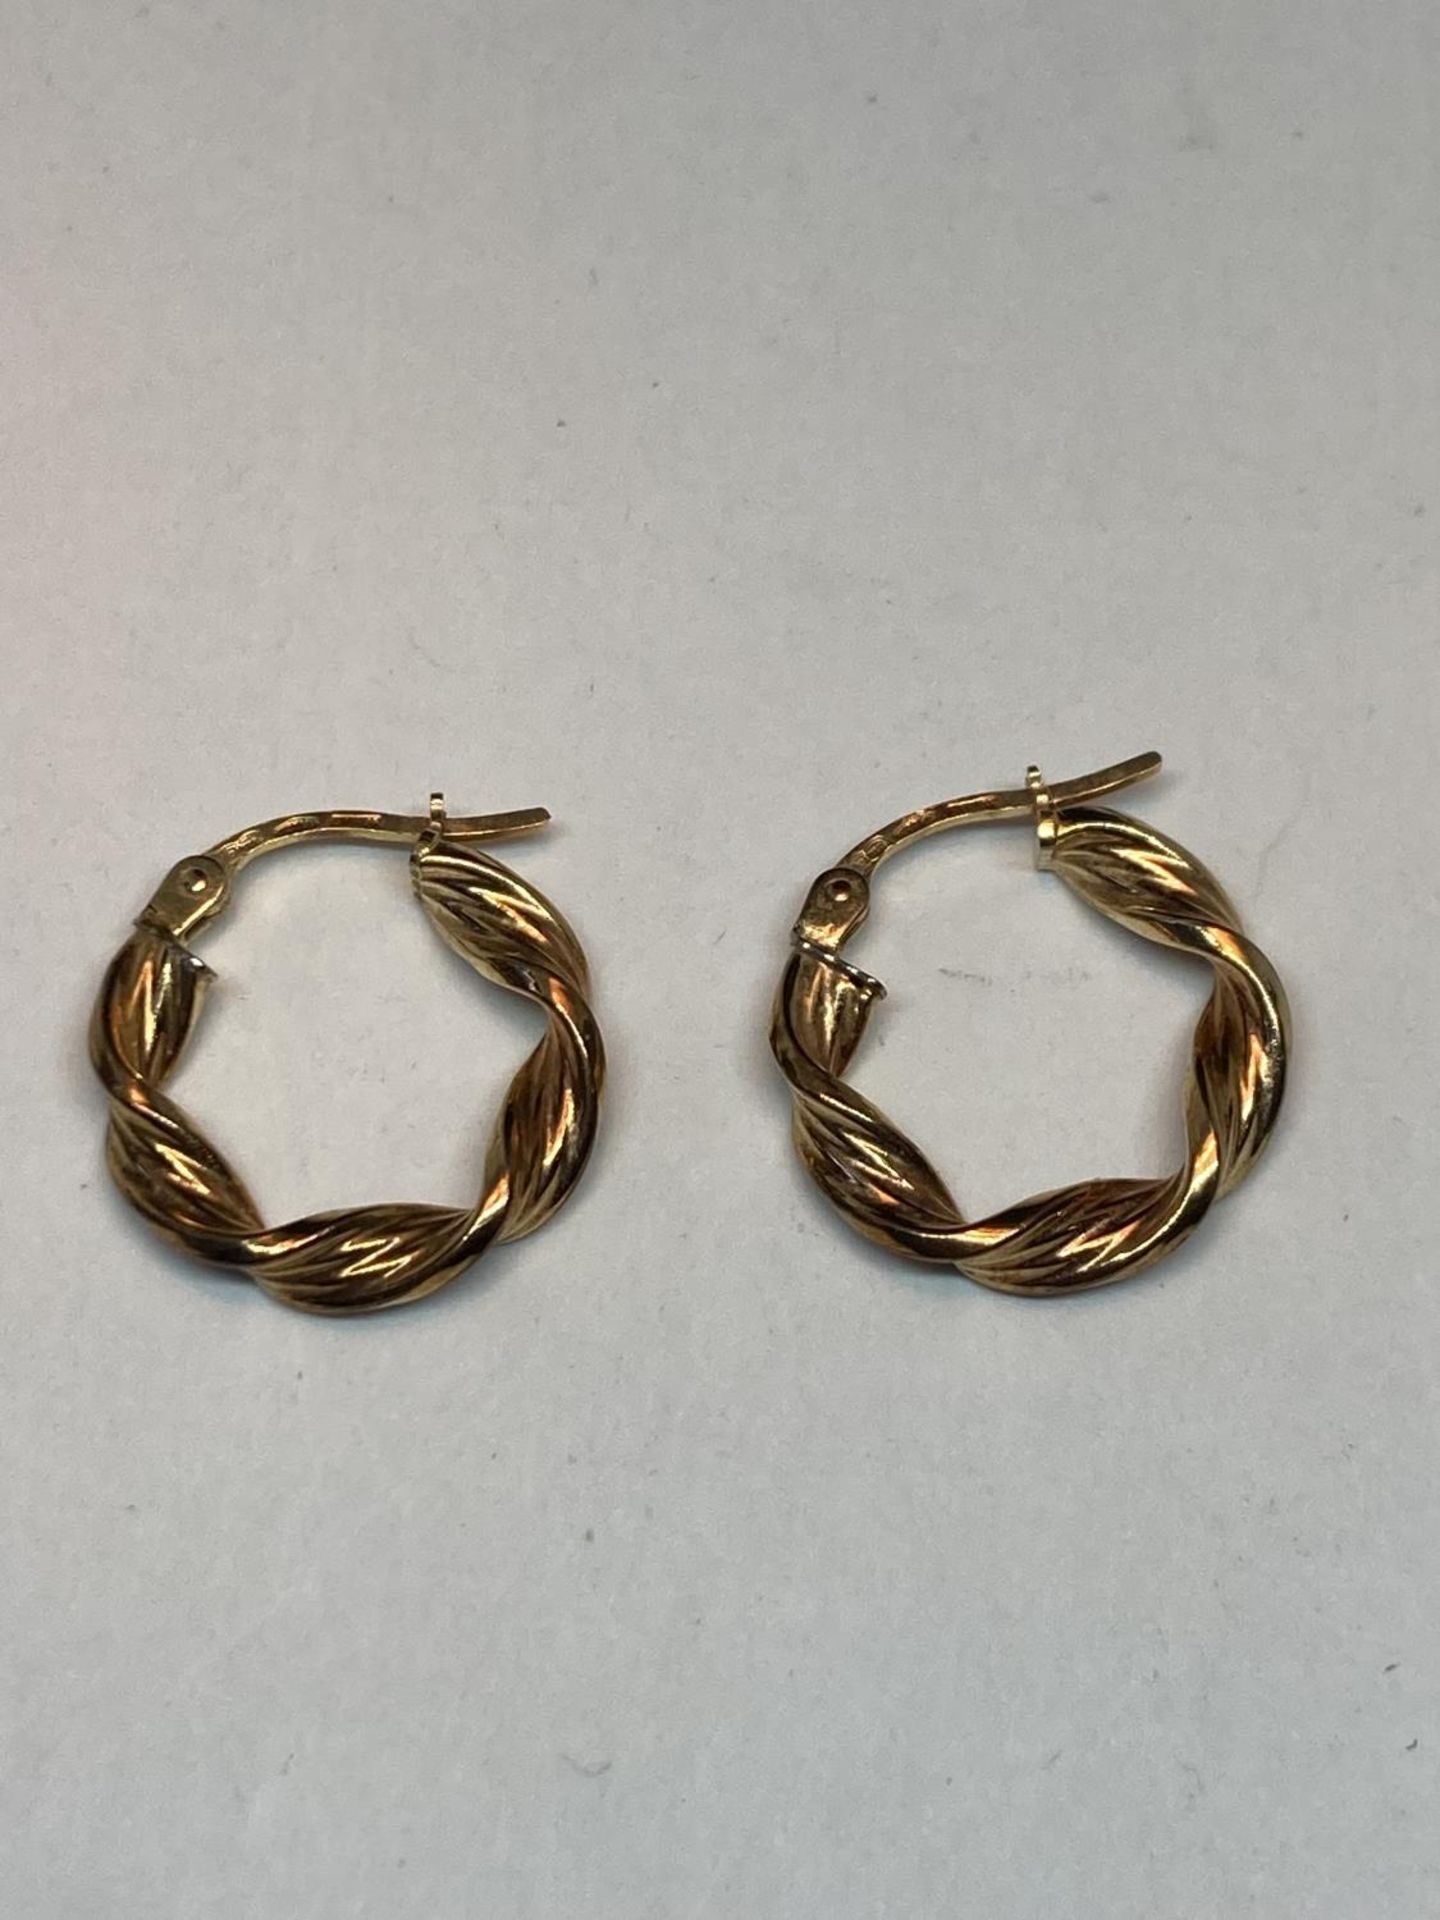 A PAIR OF 9 CARAT GOLD TWISTED HOOP EARRINGS GROSS WEIGHT 1.21 GRAMS - Image 2 of 6